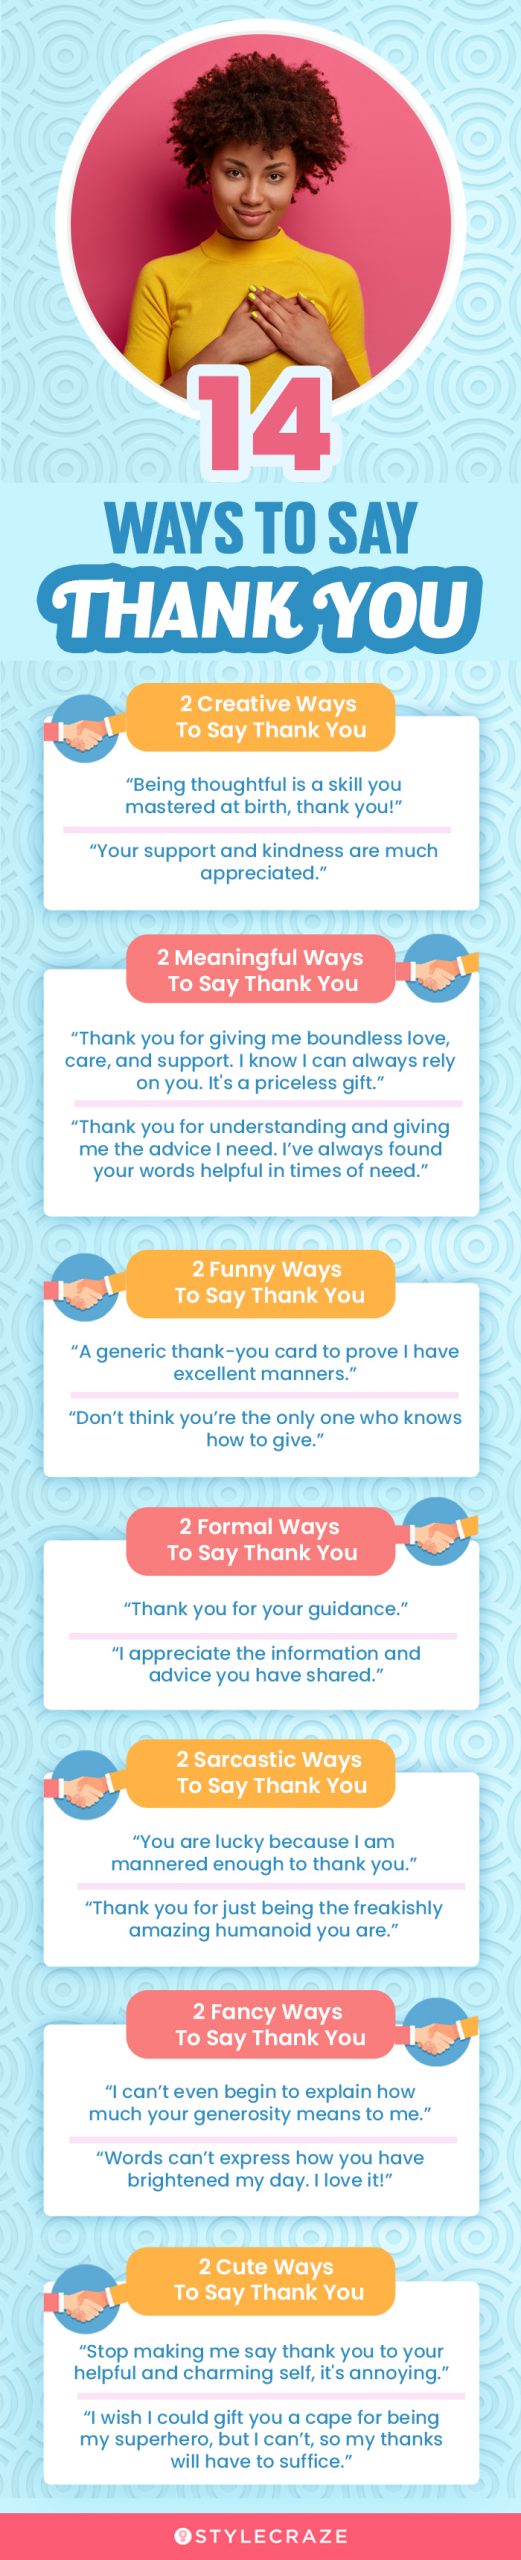 14 ways to say thank you (infographic)